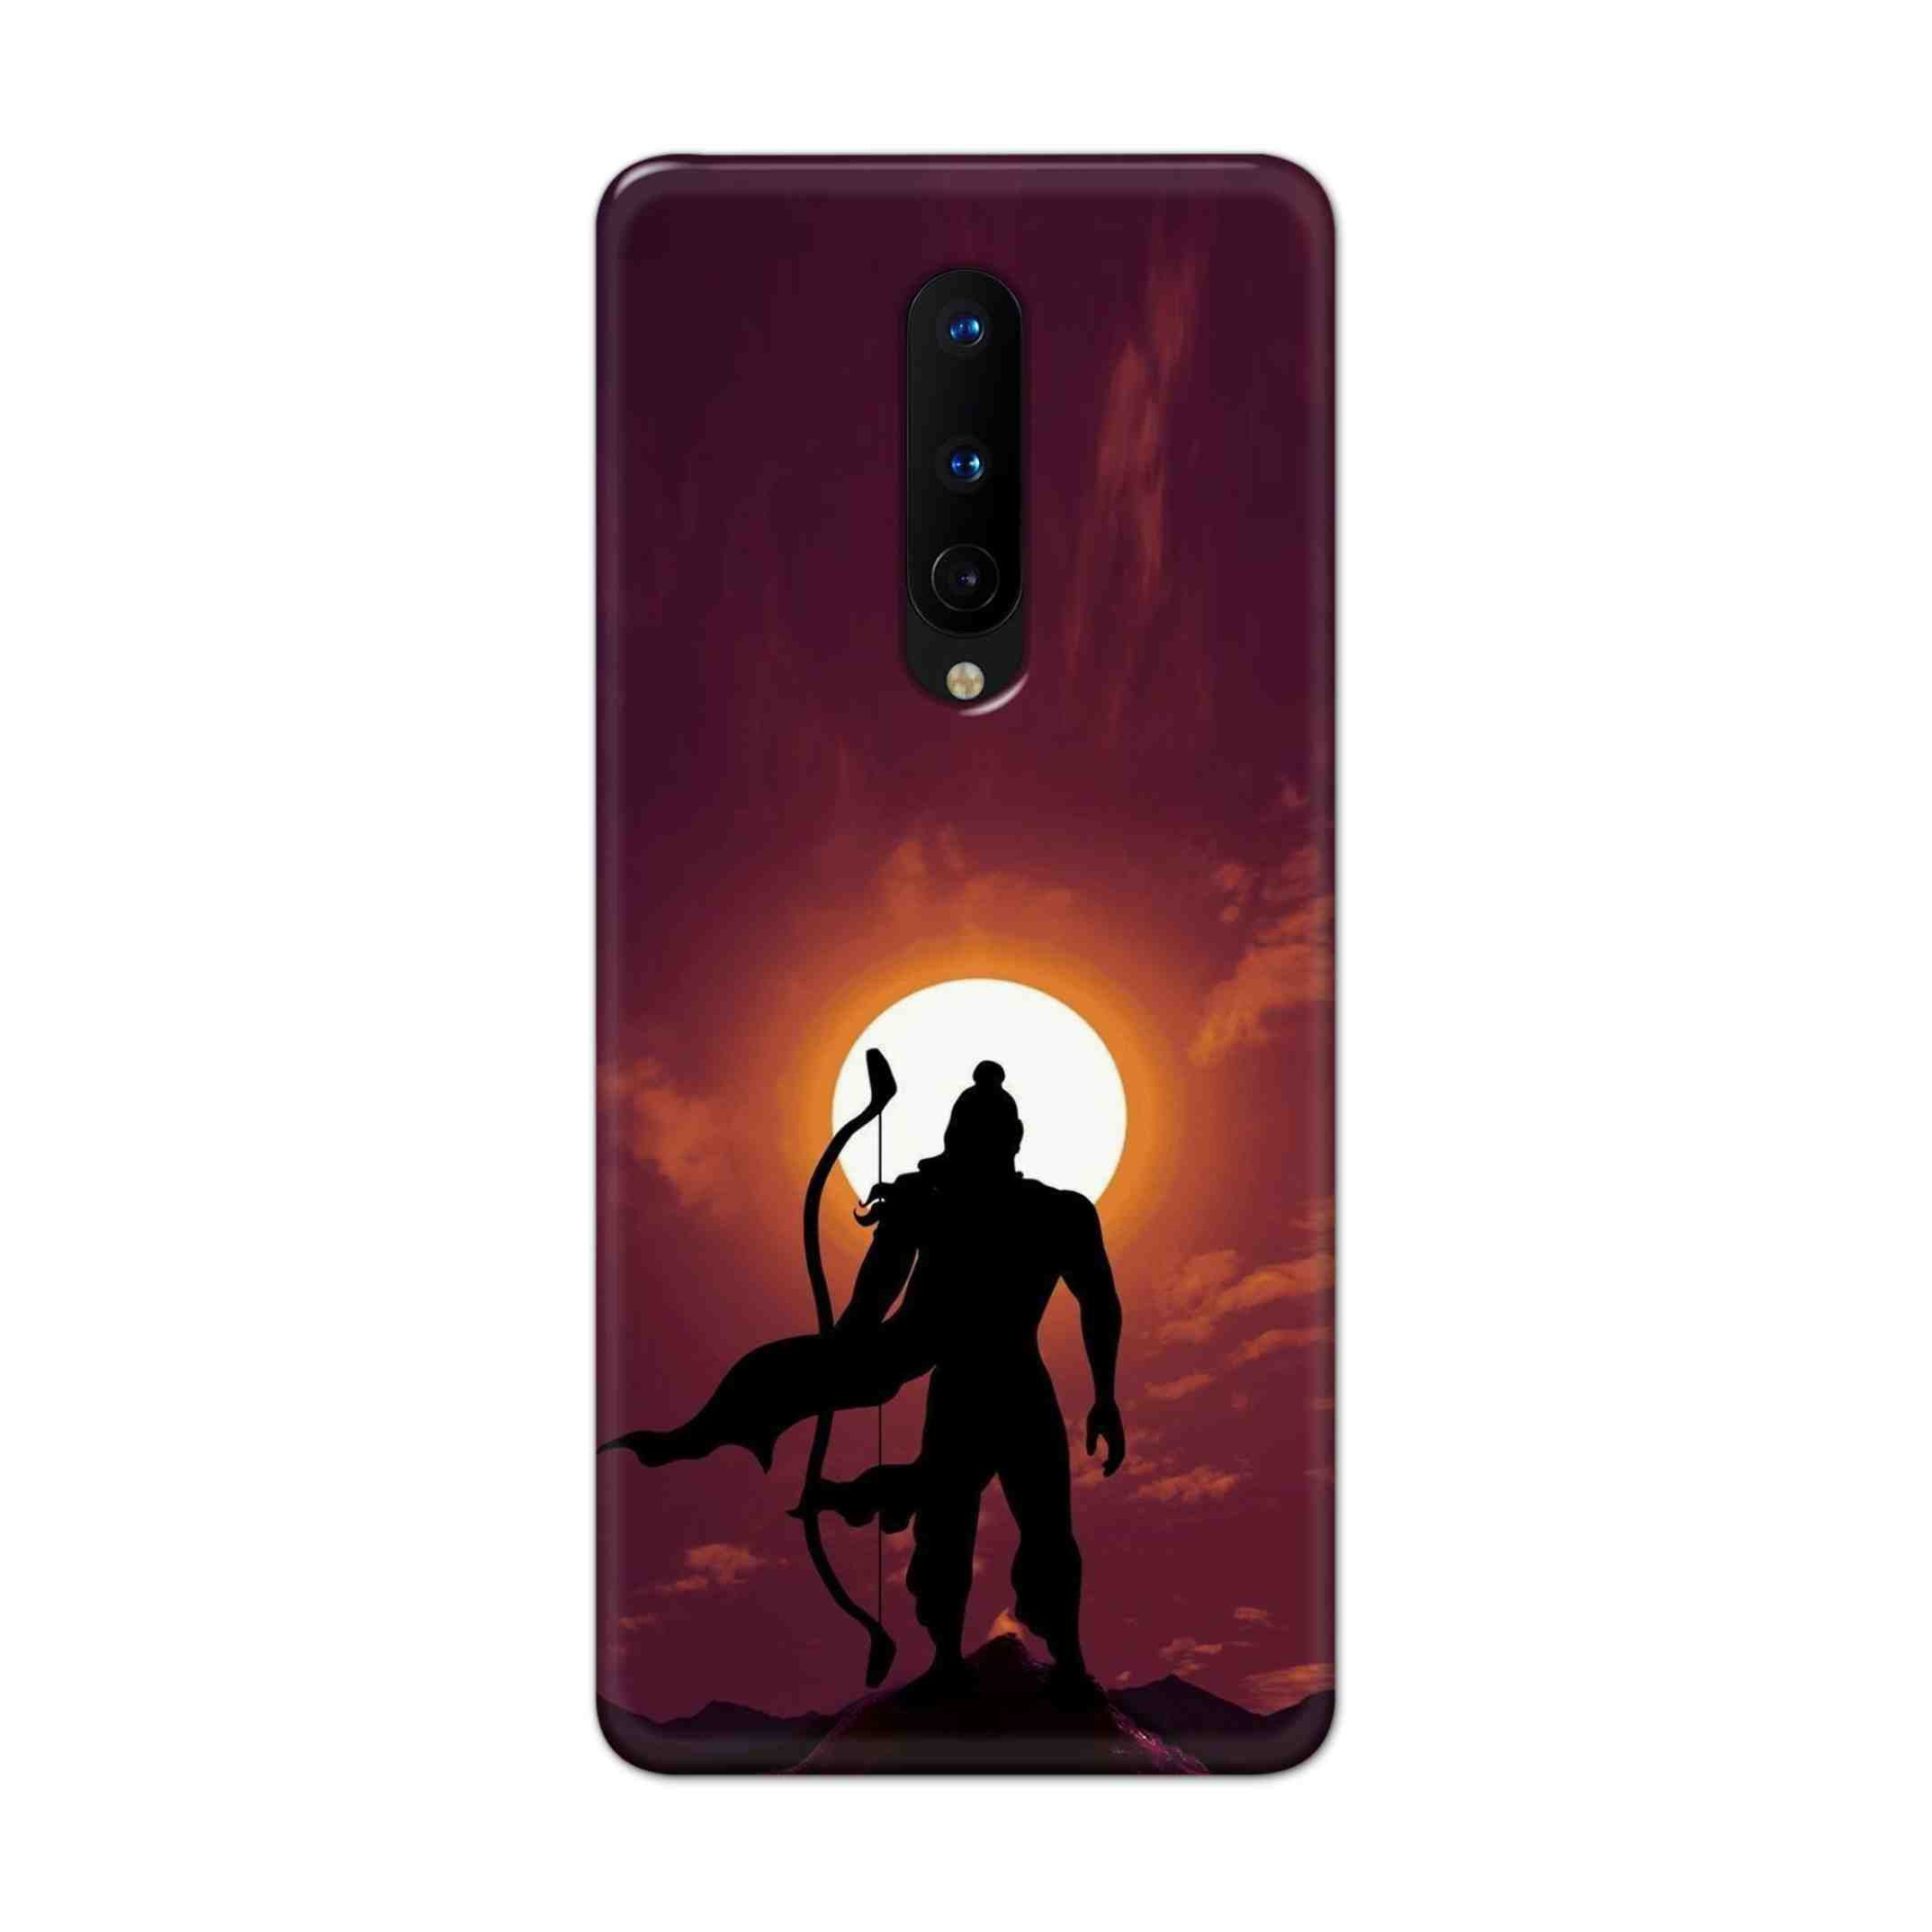 Buy Ram Hard Back Mobile Phone Case Cover For OnePlus 8 Online